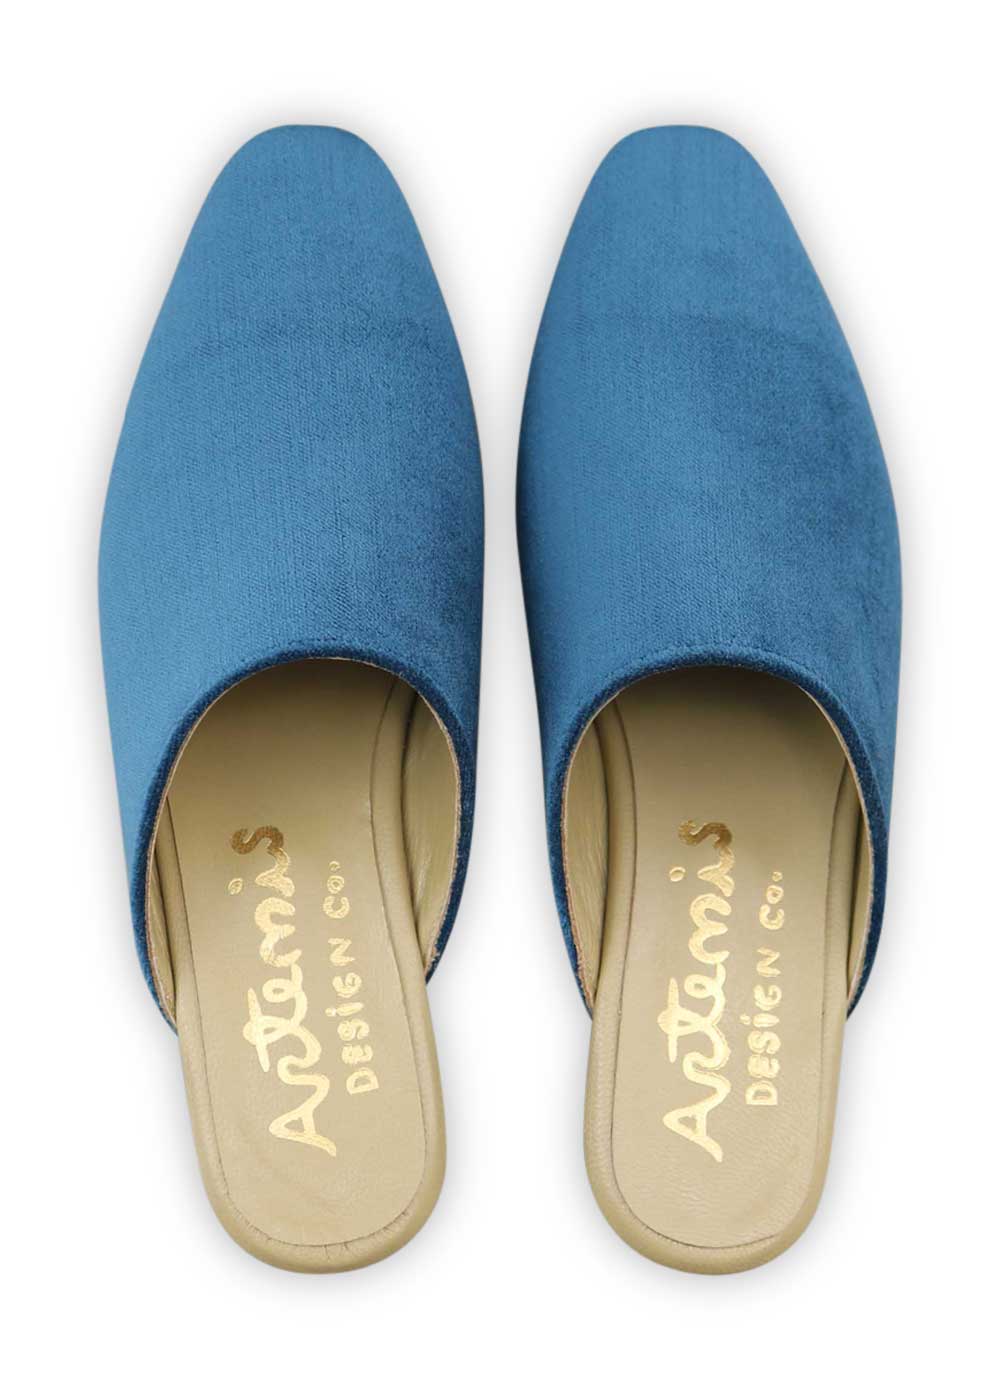 Artemis Design Co's Women's Velvet Mules in teal offer a luxurious and elegant footwear option. Crafted with plush velvet material in a stunning teal hue, these mules combine comfort with sophistication. With a sleek silhouette and a timeless design, they effortlessly elevate any outfit, whether for a casual day out or a special occasion. (Front View)